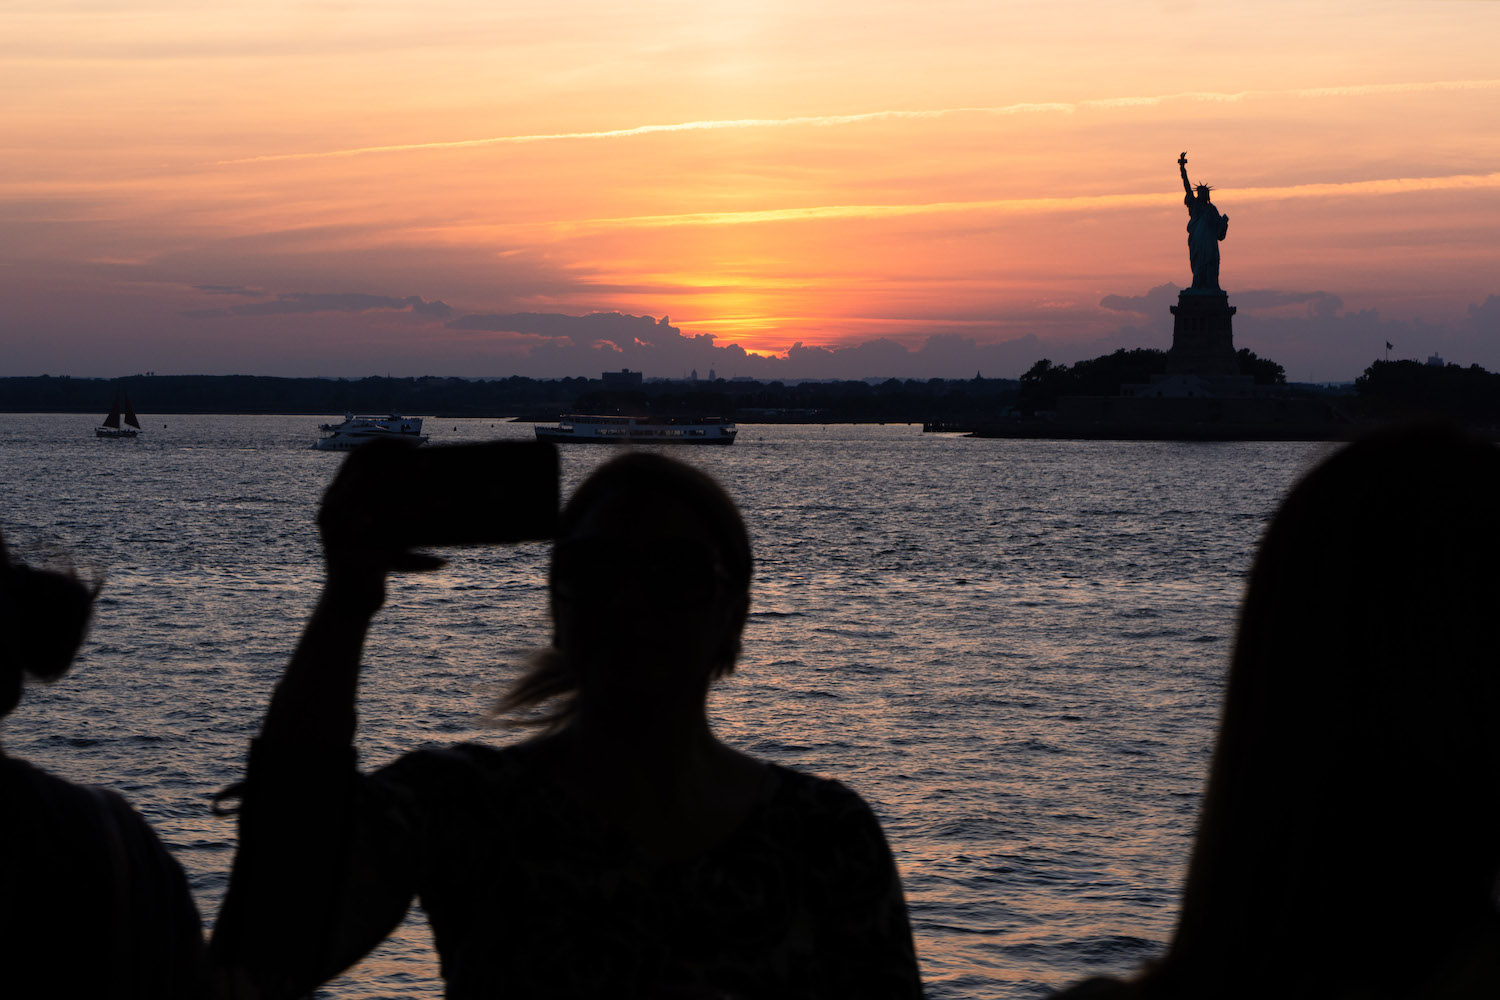 The silhouette of three people looking at the Statue of Liberty onboard the Staten Island Ferry. The sun is setting below the horizon.